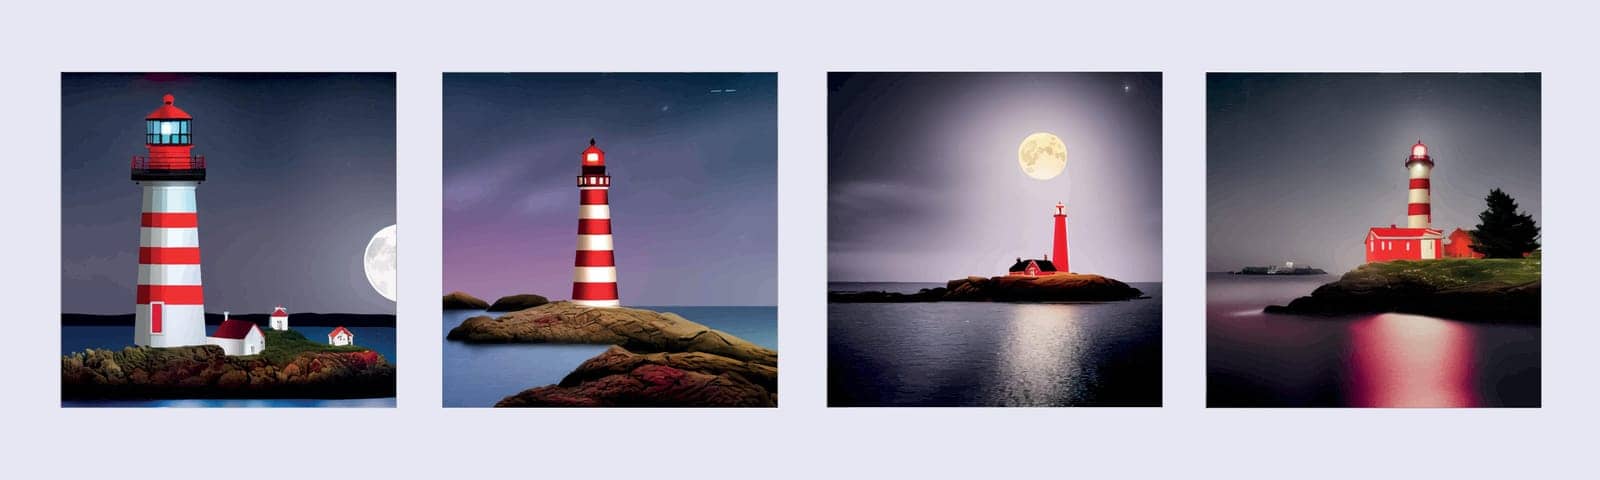 Red with white Lighthouse on sea shore at night in summer. Landscape view an ocean lighthouse on a hill with glowing light in a bay with moon and stars in the sky. Cartoon style vector illustration.